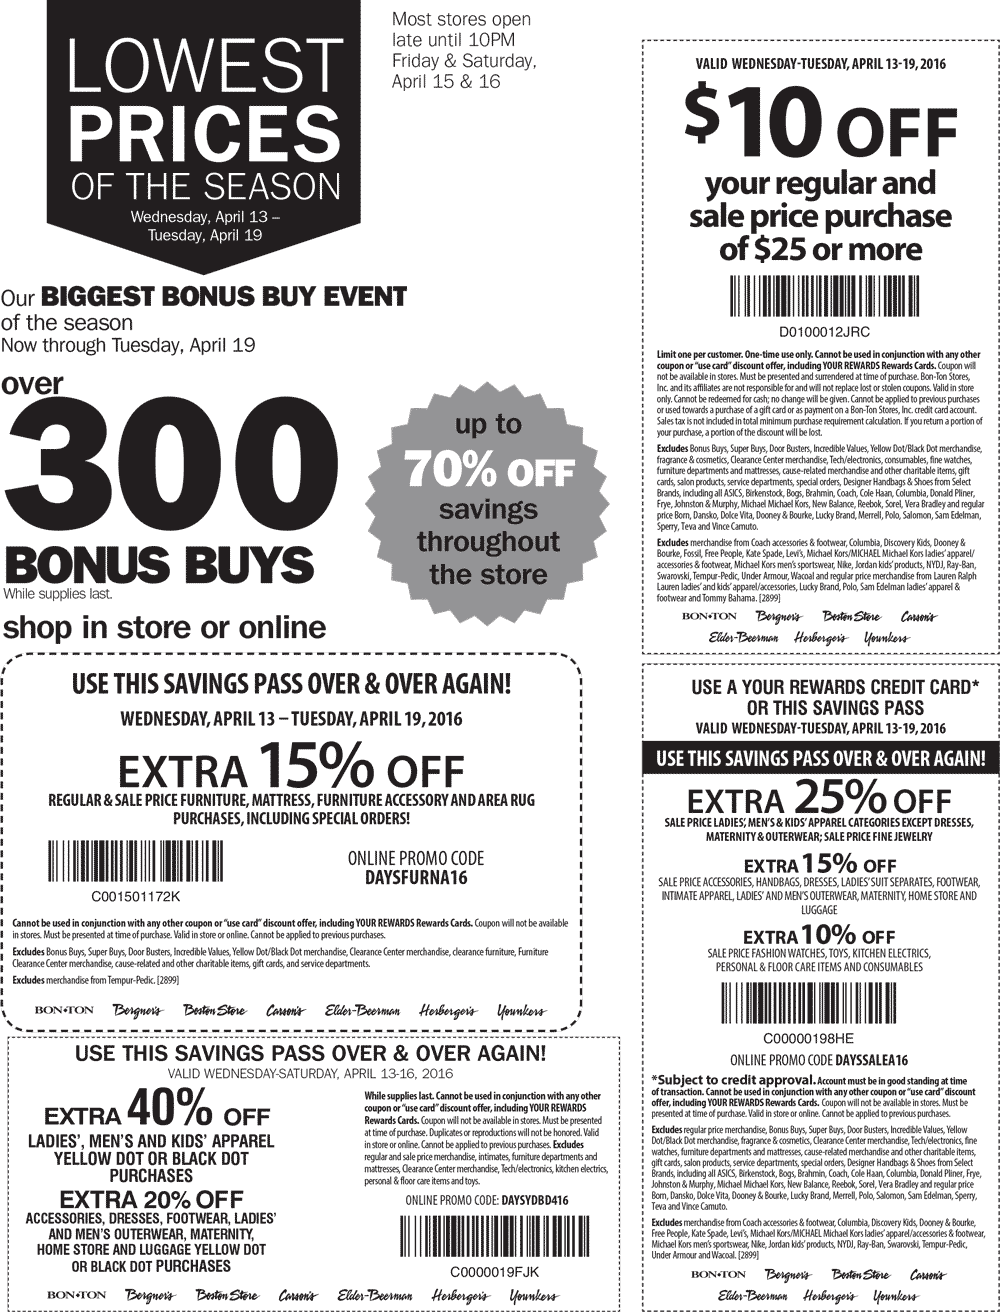 Carsons Coupon April 2024 $10 off $25 & more at Carsons, Bon Ton & sister stores, or 25% online via promo code DAYSSALEA16